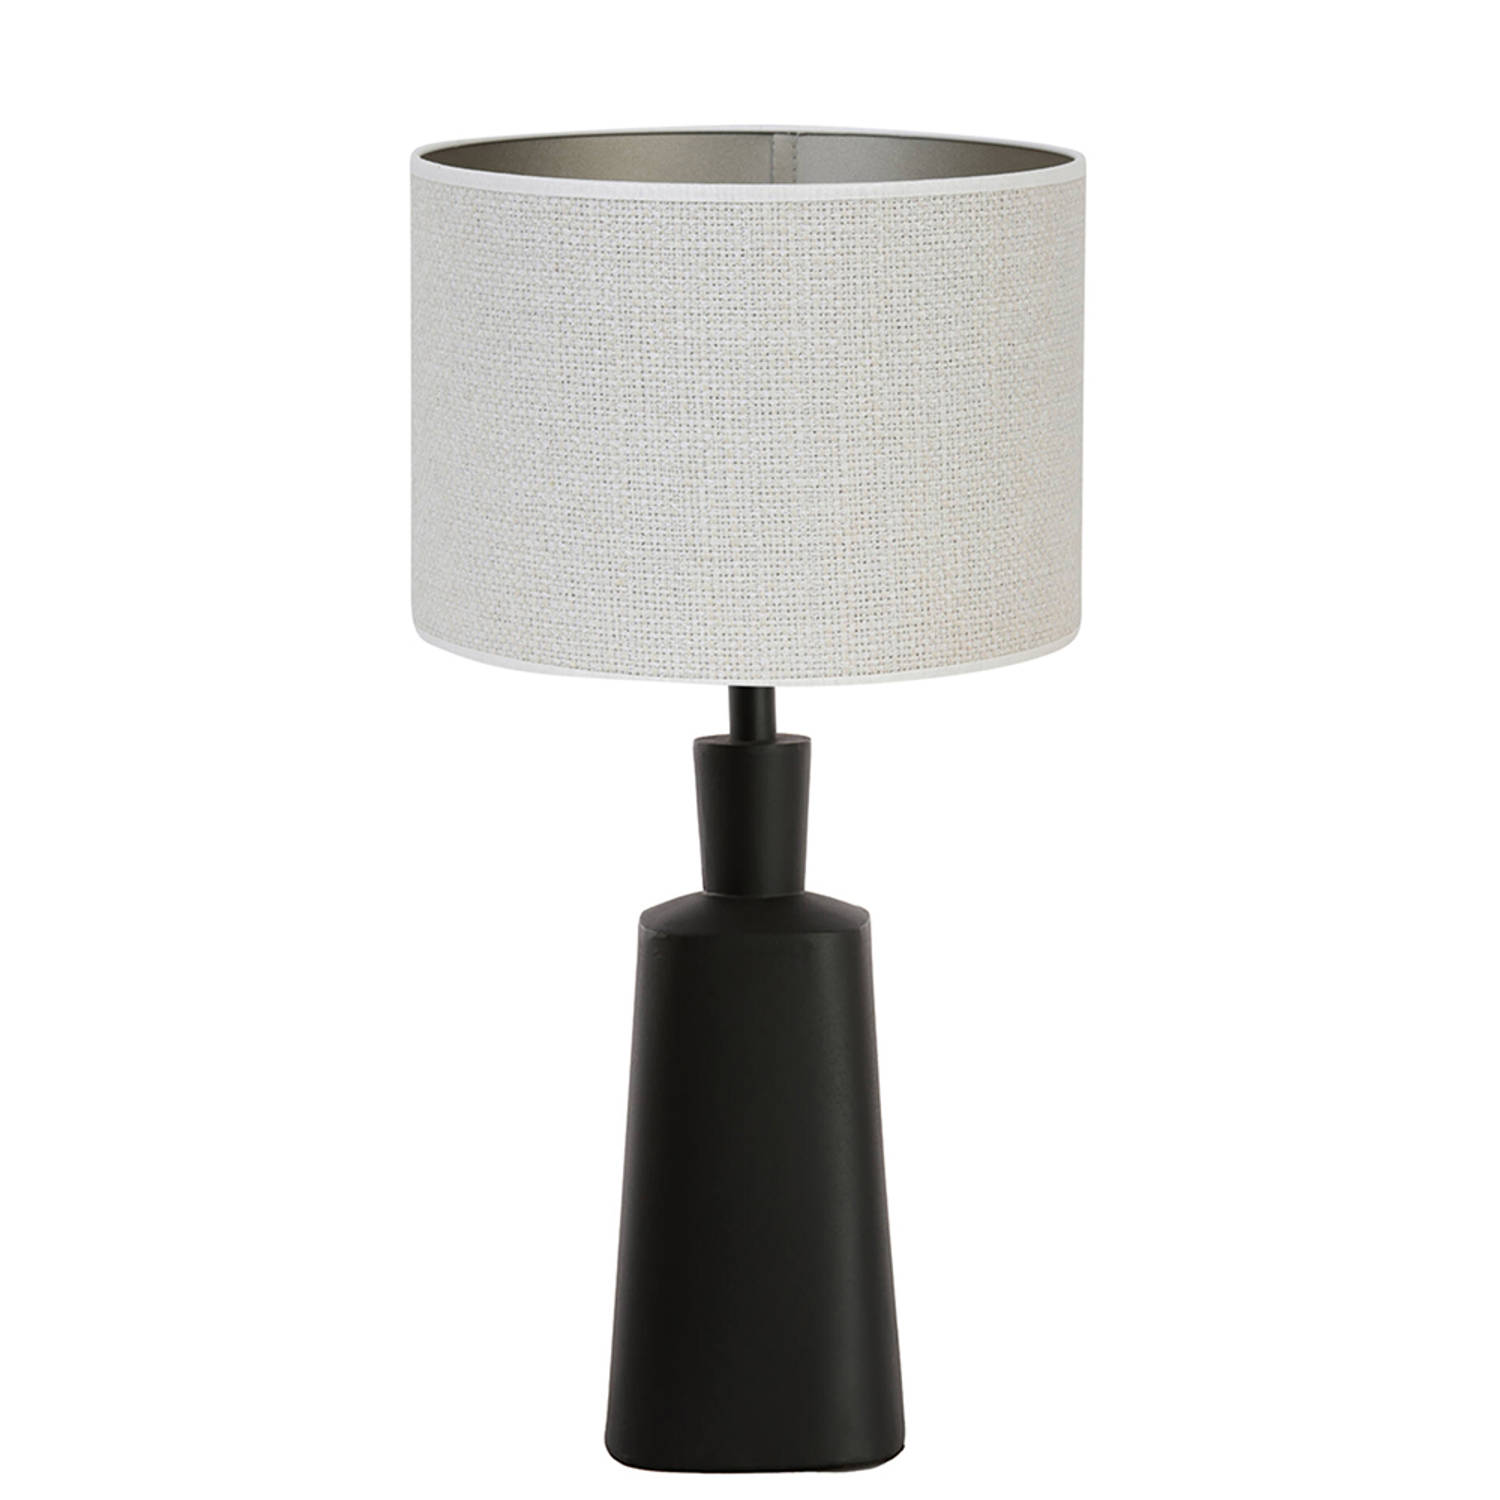 Light and Living Donah tafellamp - Ø 30 cm - E27 (grote fitting) - wit